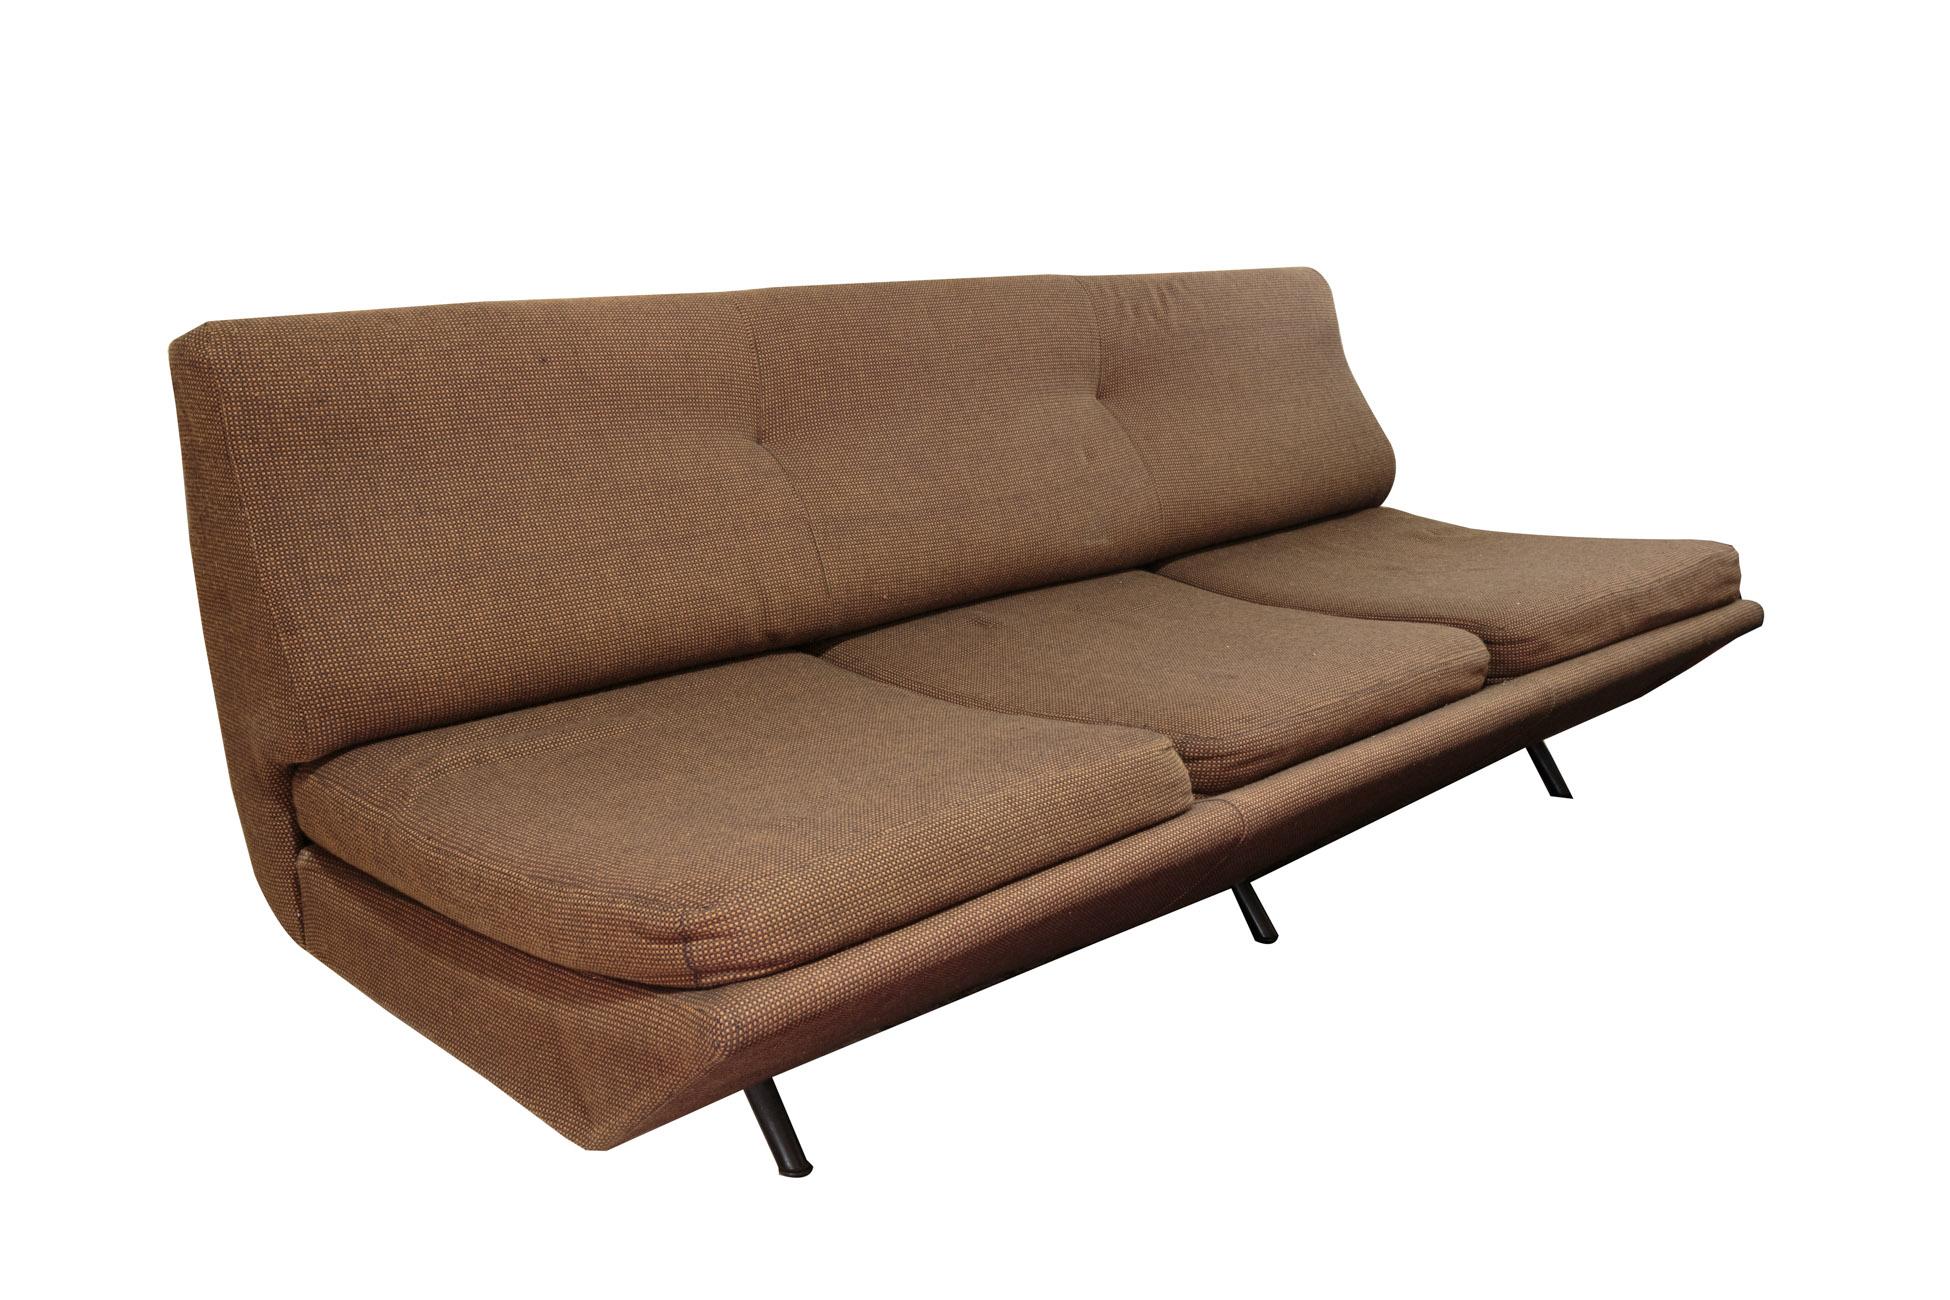 Sofa, model Sleep-O-Matic designed by Marco Zanuso, 1951.
Manufacture by Arflex (Italy). Metal structure, foam rubber back and seat covered by refined fabric newly upholstered. The seat cushion is mounted on a track allowing it pull away from the